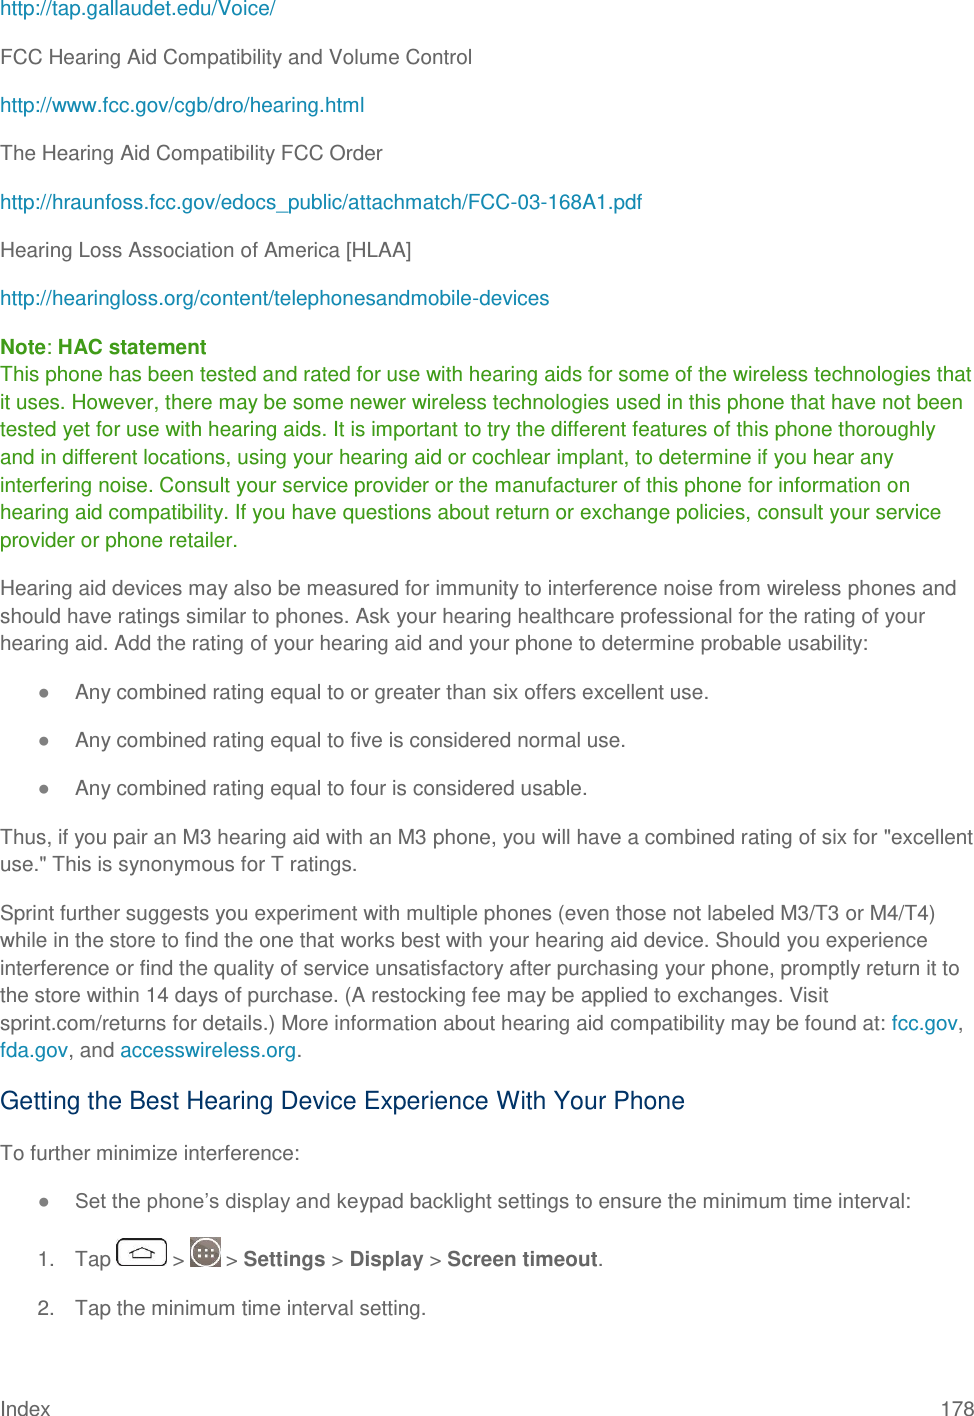 Index 178 http://tap.gallaudet.edu/Voice/ FCC Hearing Aid Compatibility and Volume Control http://www.fcc.gov/cgb/dro/hearing.html The Hearing Aid Compatibility FCC Order http://hraunfoss.fcc.gov/edocs_public/attachmatch/FCC-03-168A1.pdf Hearing Loss Association of America [HLAA] http://hearingloss.org/content/telephonesandmobile-devices Note: HAC statement  This phone has been tested and rated for use with hearing aids for some of the wireless technologies that it uses. However, there may be some newer wireless technologies used in this phone that have not been tested yet for use with hearing aids. It is important to try the different features of this phone thoroughly and in different locations, using your hearing aid or cochlear implant, to determine if you hear any interfering noise. Consult your service provider or the manufacturer of this phone for information on hearing aid compatibility. If you have questions about return or exchange policies, consult your service provider or phone retailer. Hearing aid devices may also be measured for immunity to interference noise from wireless phones and should have ratings similar to phones. Ask your hearing healthcare professional for the rating of your hearing aid. Add the rating of your hearing aid and your phone to determine probable usability: ● Any combined rating equal to or greater than six offers excellent use. ● Any combined rating equal to five is considered normal use. ● Any combined rating equal to four is considered usable. Thus, if you pair an M3 hearing aid with an M3 phone, you will have a combined rating of six for &quot;excellent use.&quot; This is synonymous for T ratings. Sprint further suggests you experiment with multiple phones (even those not labeled M3/T3 or M4/T4) while in the store to find the one that works best with your hearing aid device. Should you experience interference or find the quality of service unsatisfactory after purchasing your phone, promptly return it to the store within 14 days of purchase. (A restocking fee may be applied to exchanges. Visit sprint.com/returns for details.) More information about hearing aid compatibility may be found at: fcc.gov, fda.gov, and accesswireless.org. Getting the Best Hearing Device Experience With Your Phone To further minimize interference: ● Set the phone‘s display and keypad backlight settings to ensure the minimum time interval: 1.  Tap   &gt;   &gt; Settings &gt; Display &gt; Screen timeout. 2.  Tap the minimum time interval setting. 